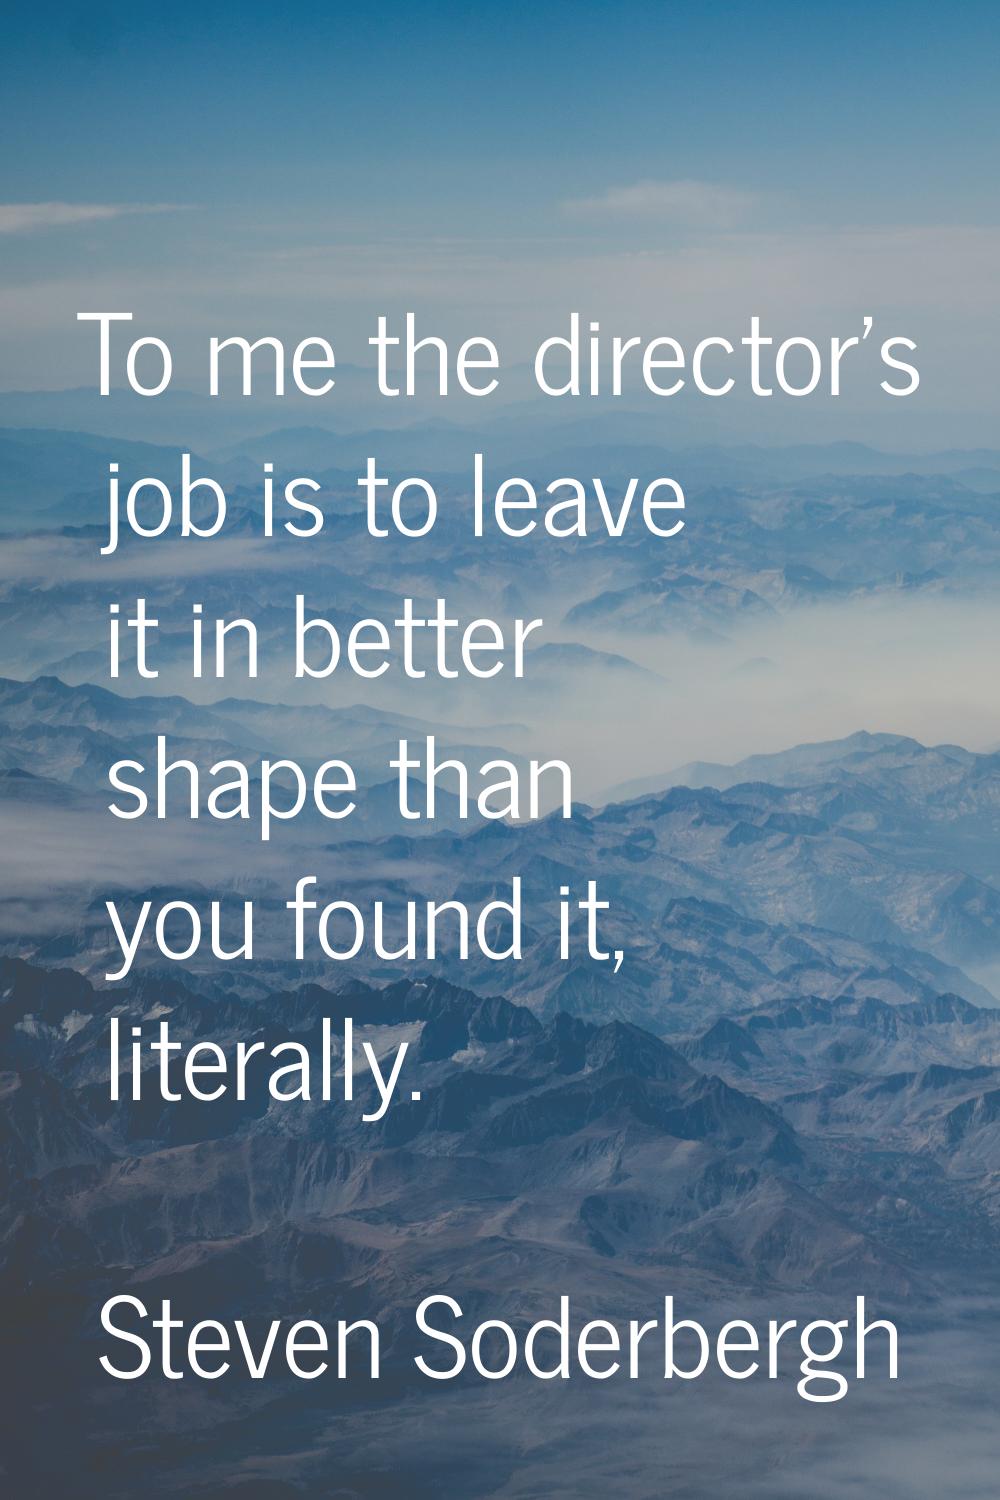 To me the director's job is to leave it in better shape than you found it, literally.